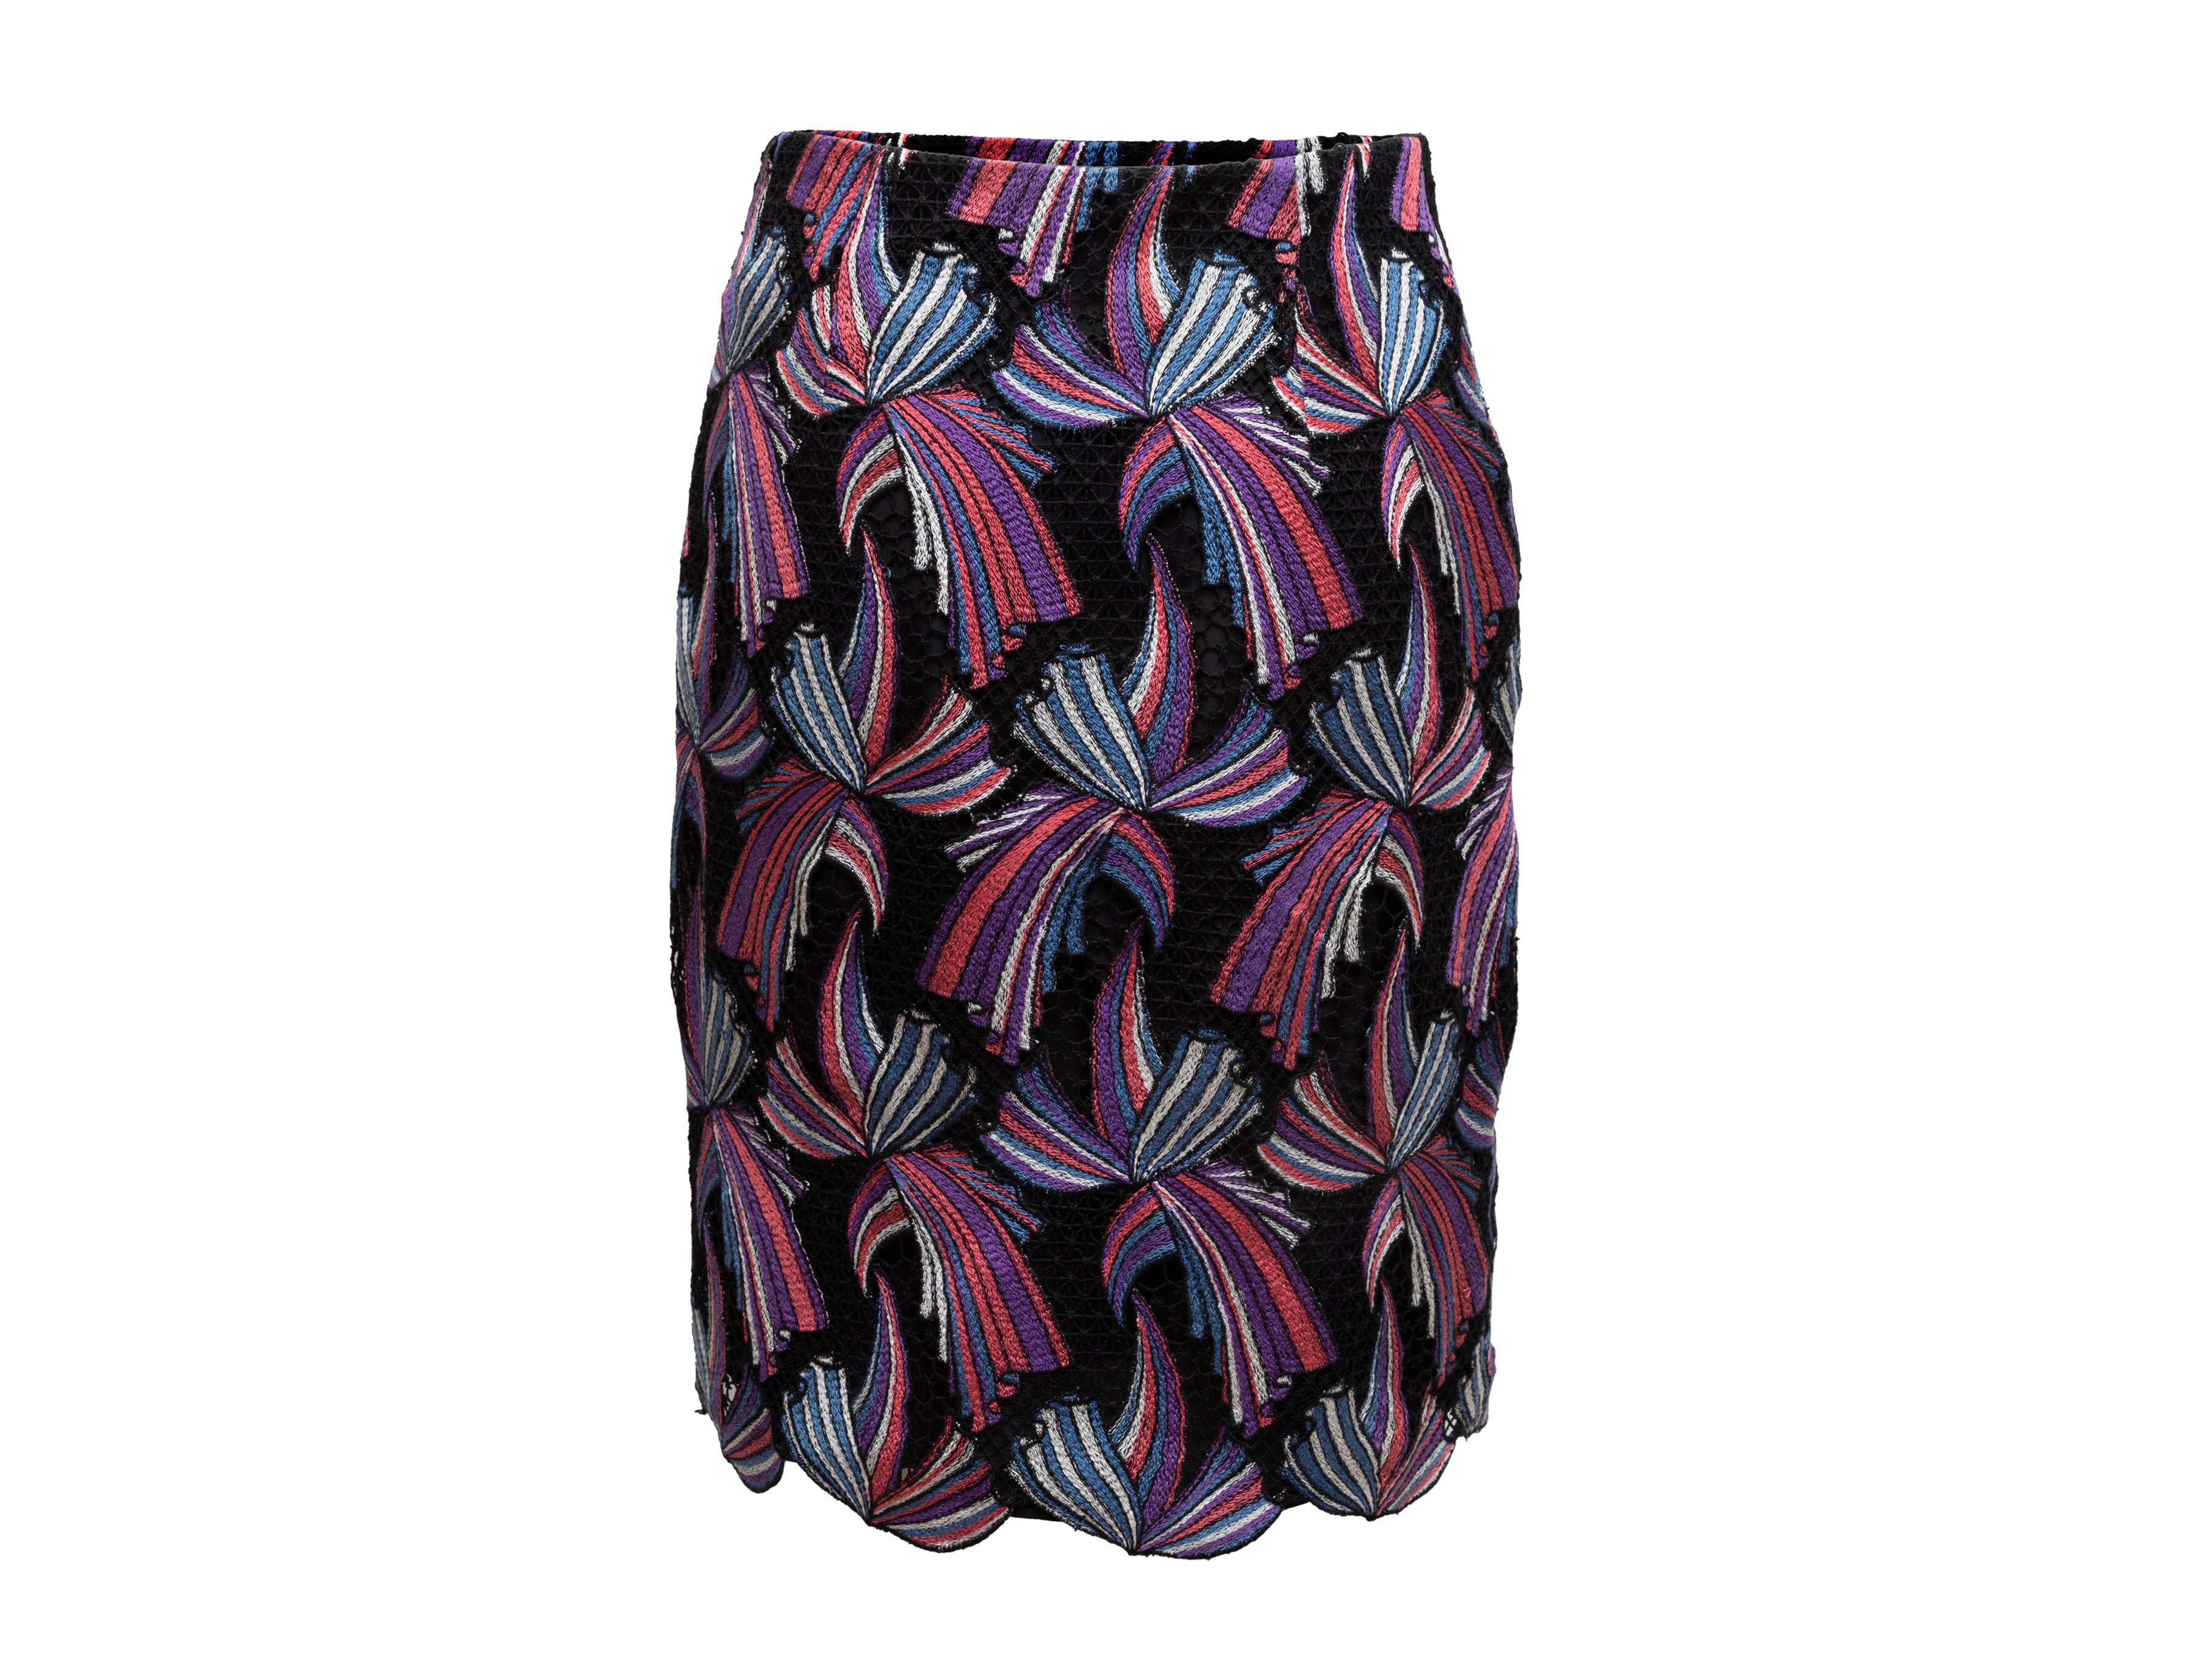 Black & Multicolor Embroidered Skirt